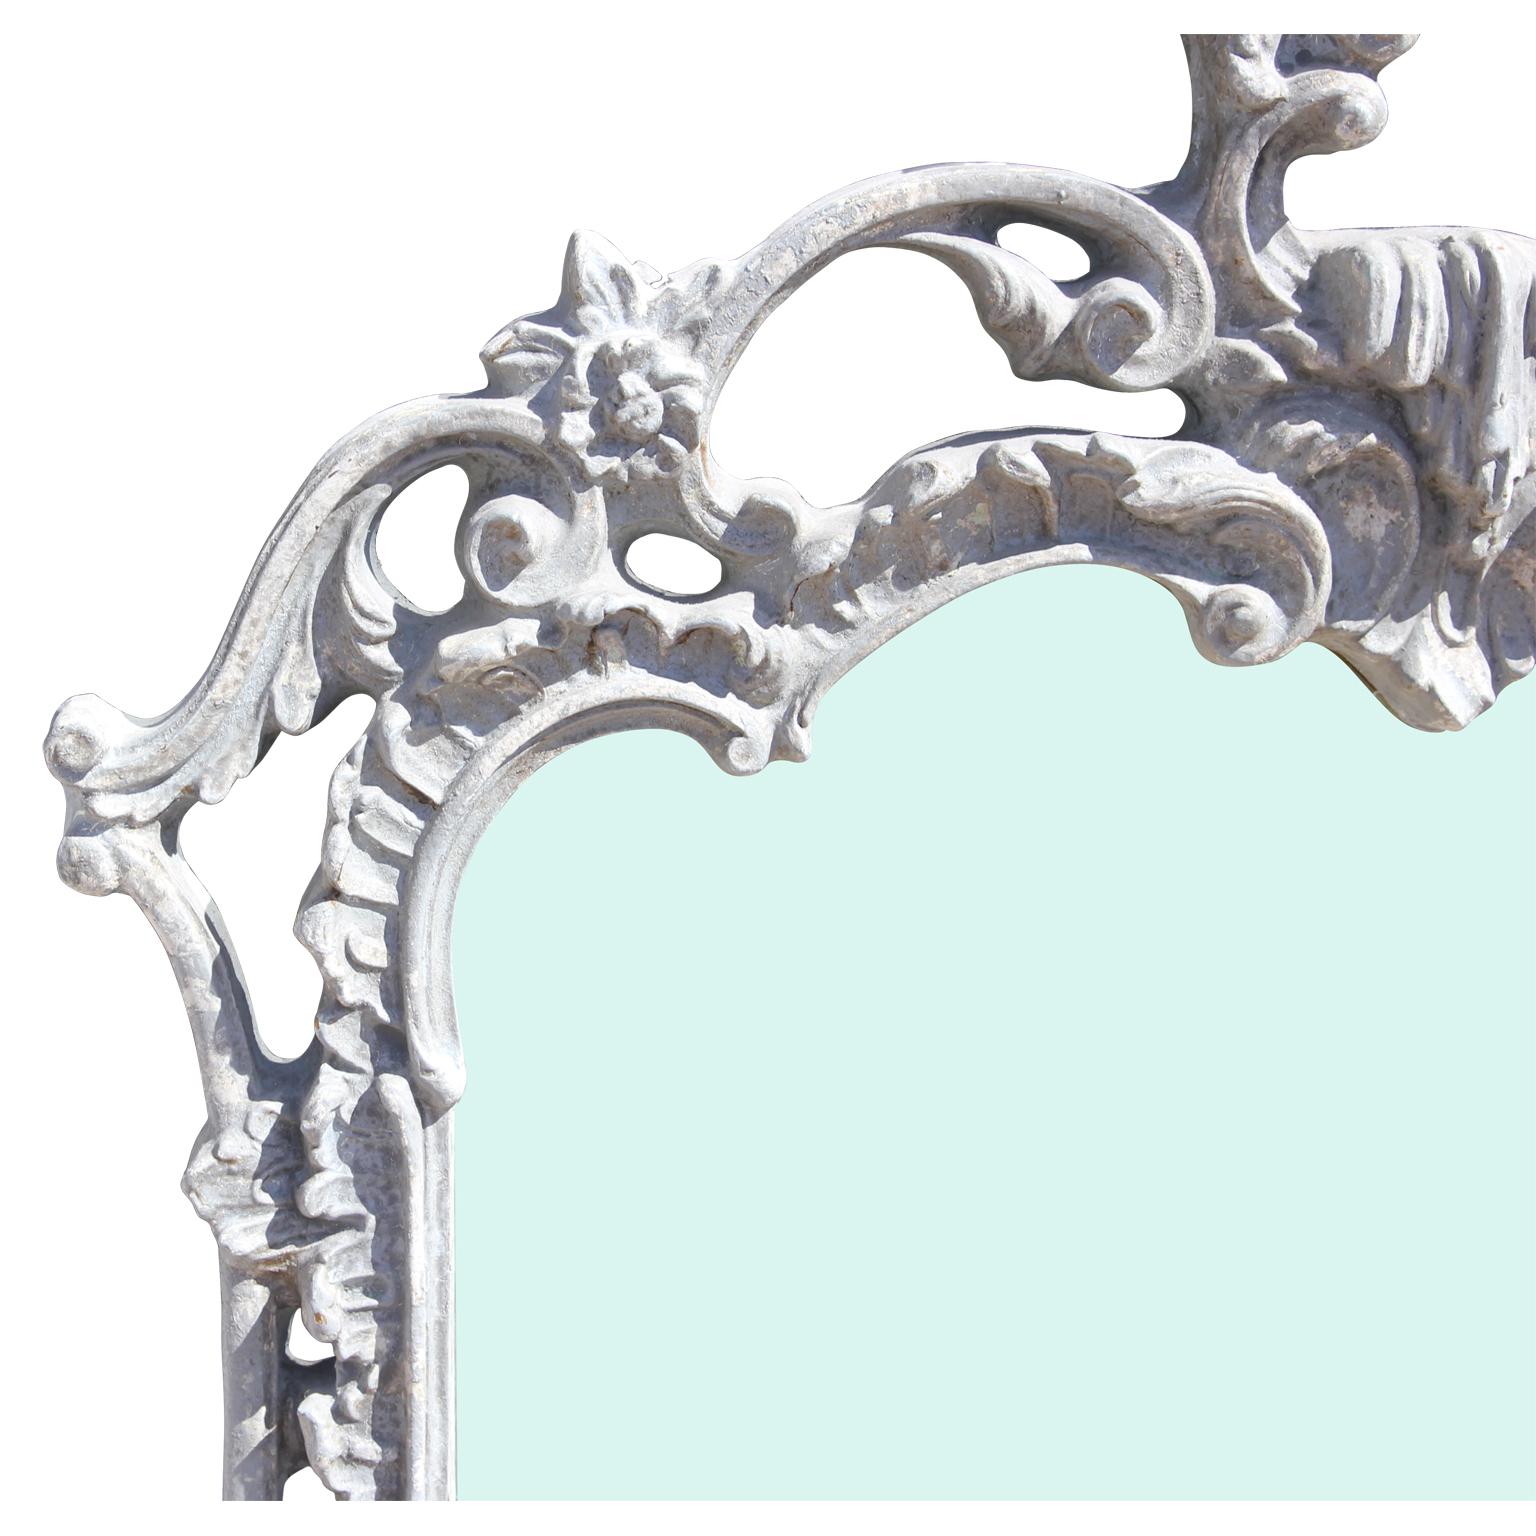 Ornate white / grey washed La Barge style carved Louis French mirror, Circa 1950s
Dimensions: without frame H 34 in. x D 19 in.